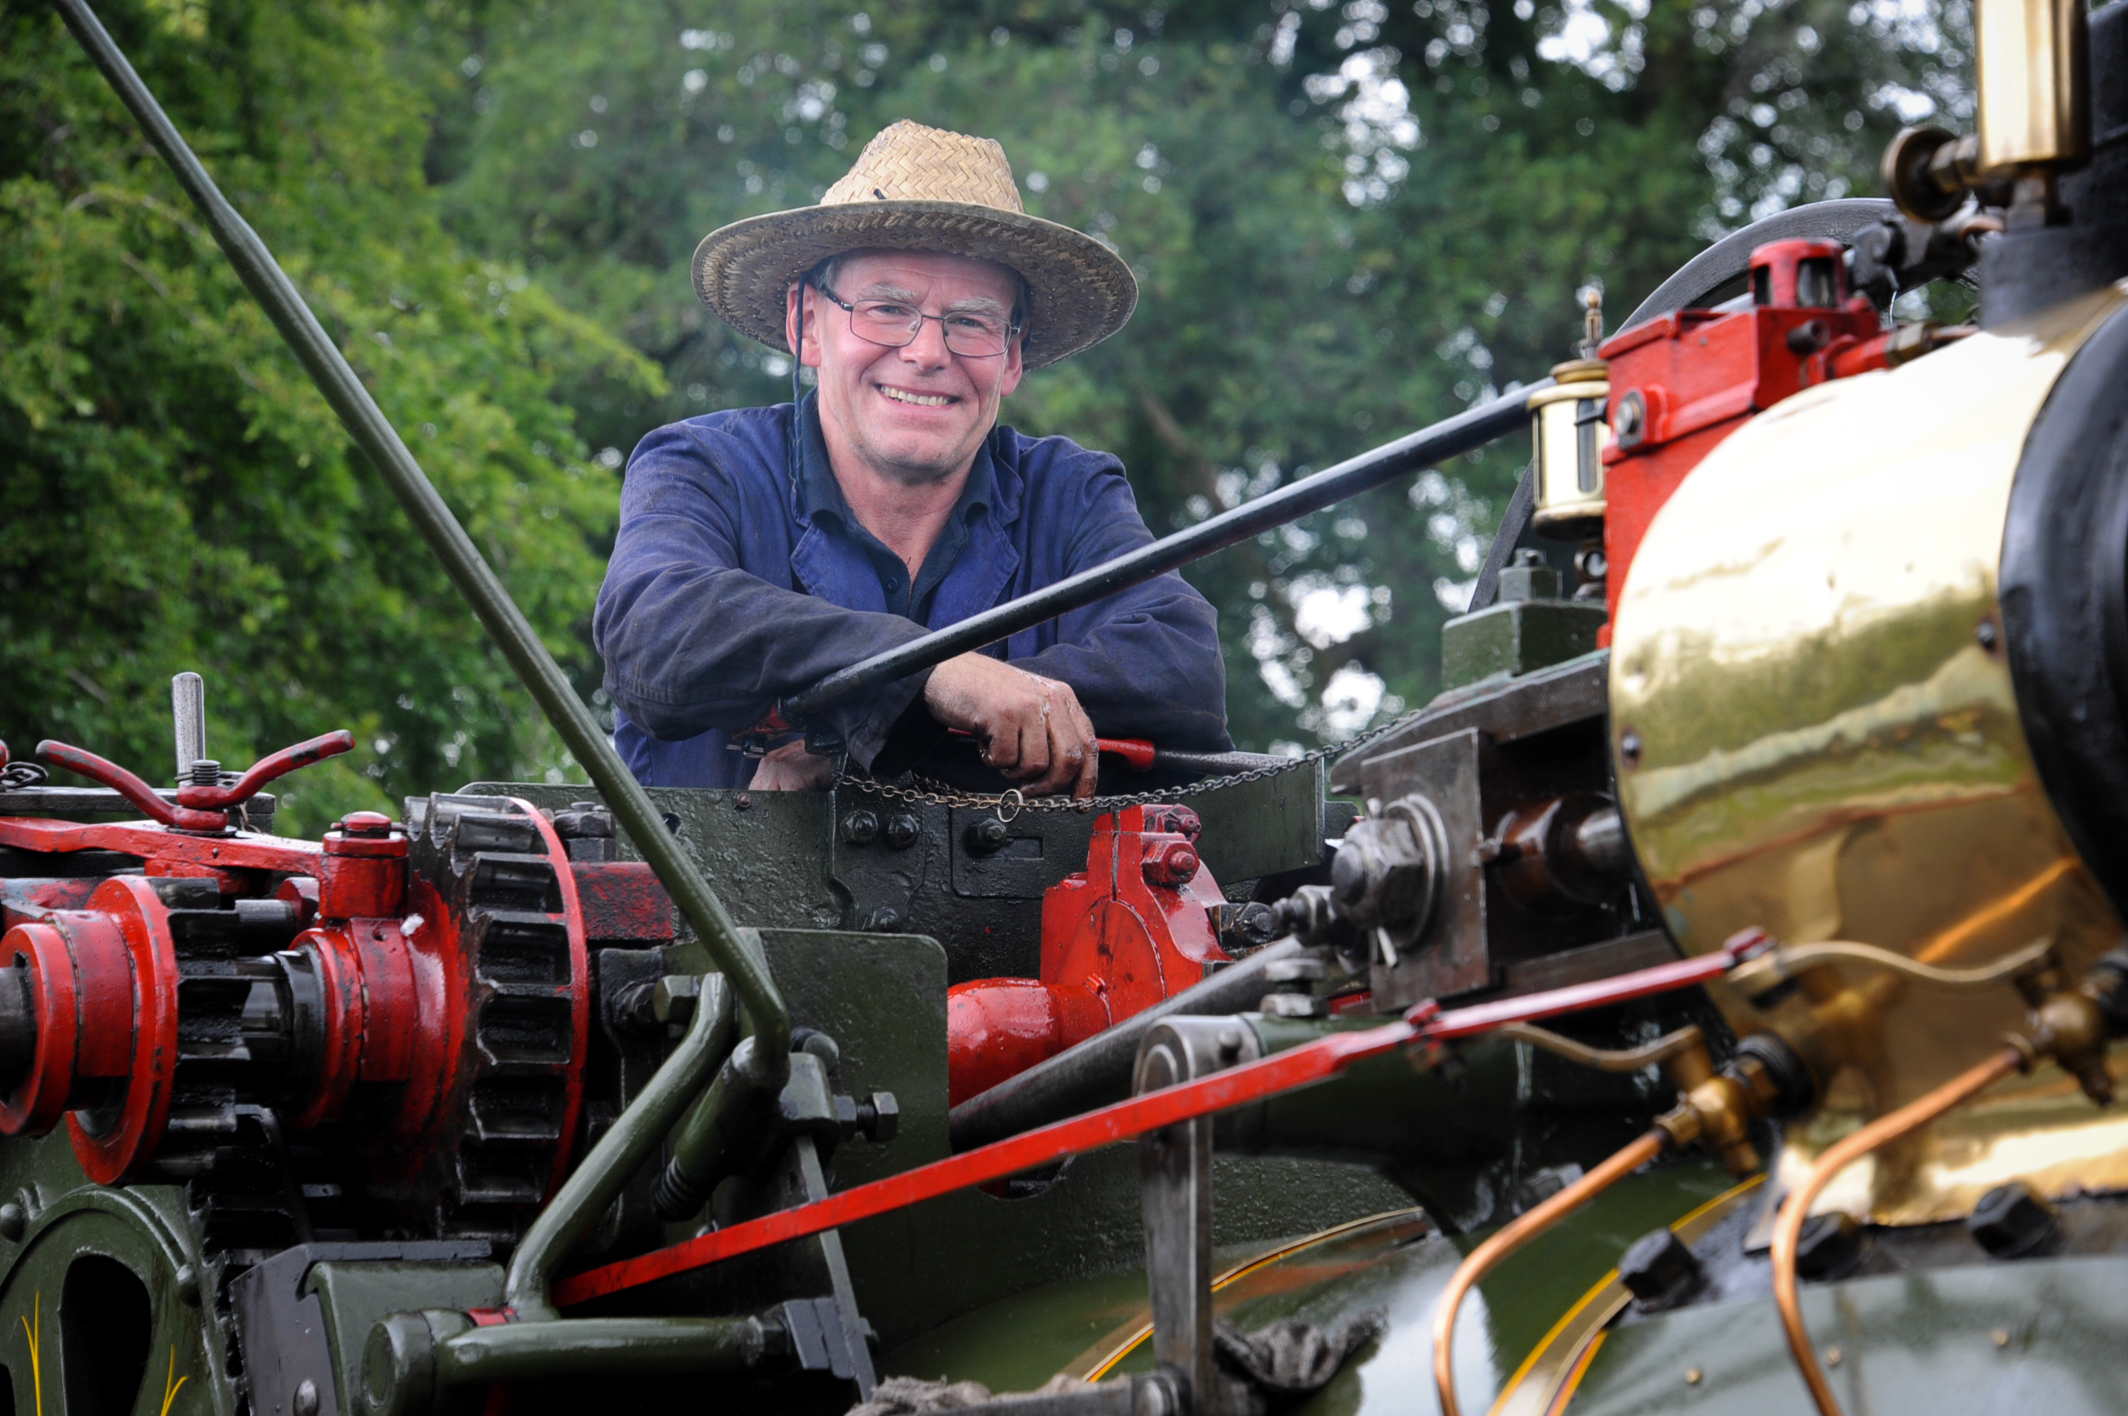 Simon Tyler working on his 1884 steam engine, Lord Burrell, at the Gala in 2017 